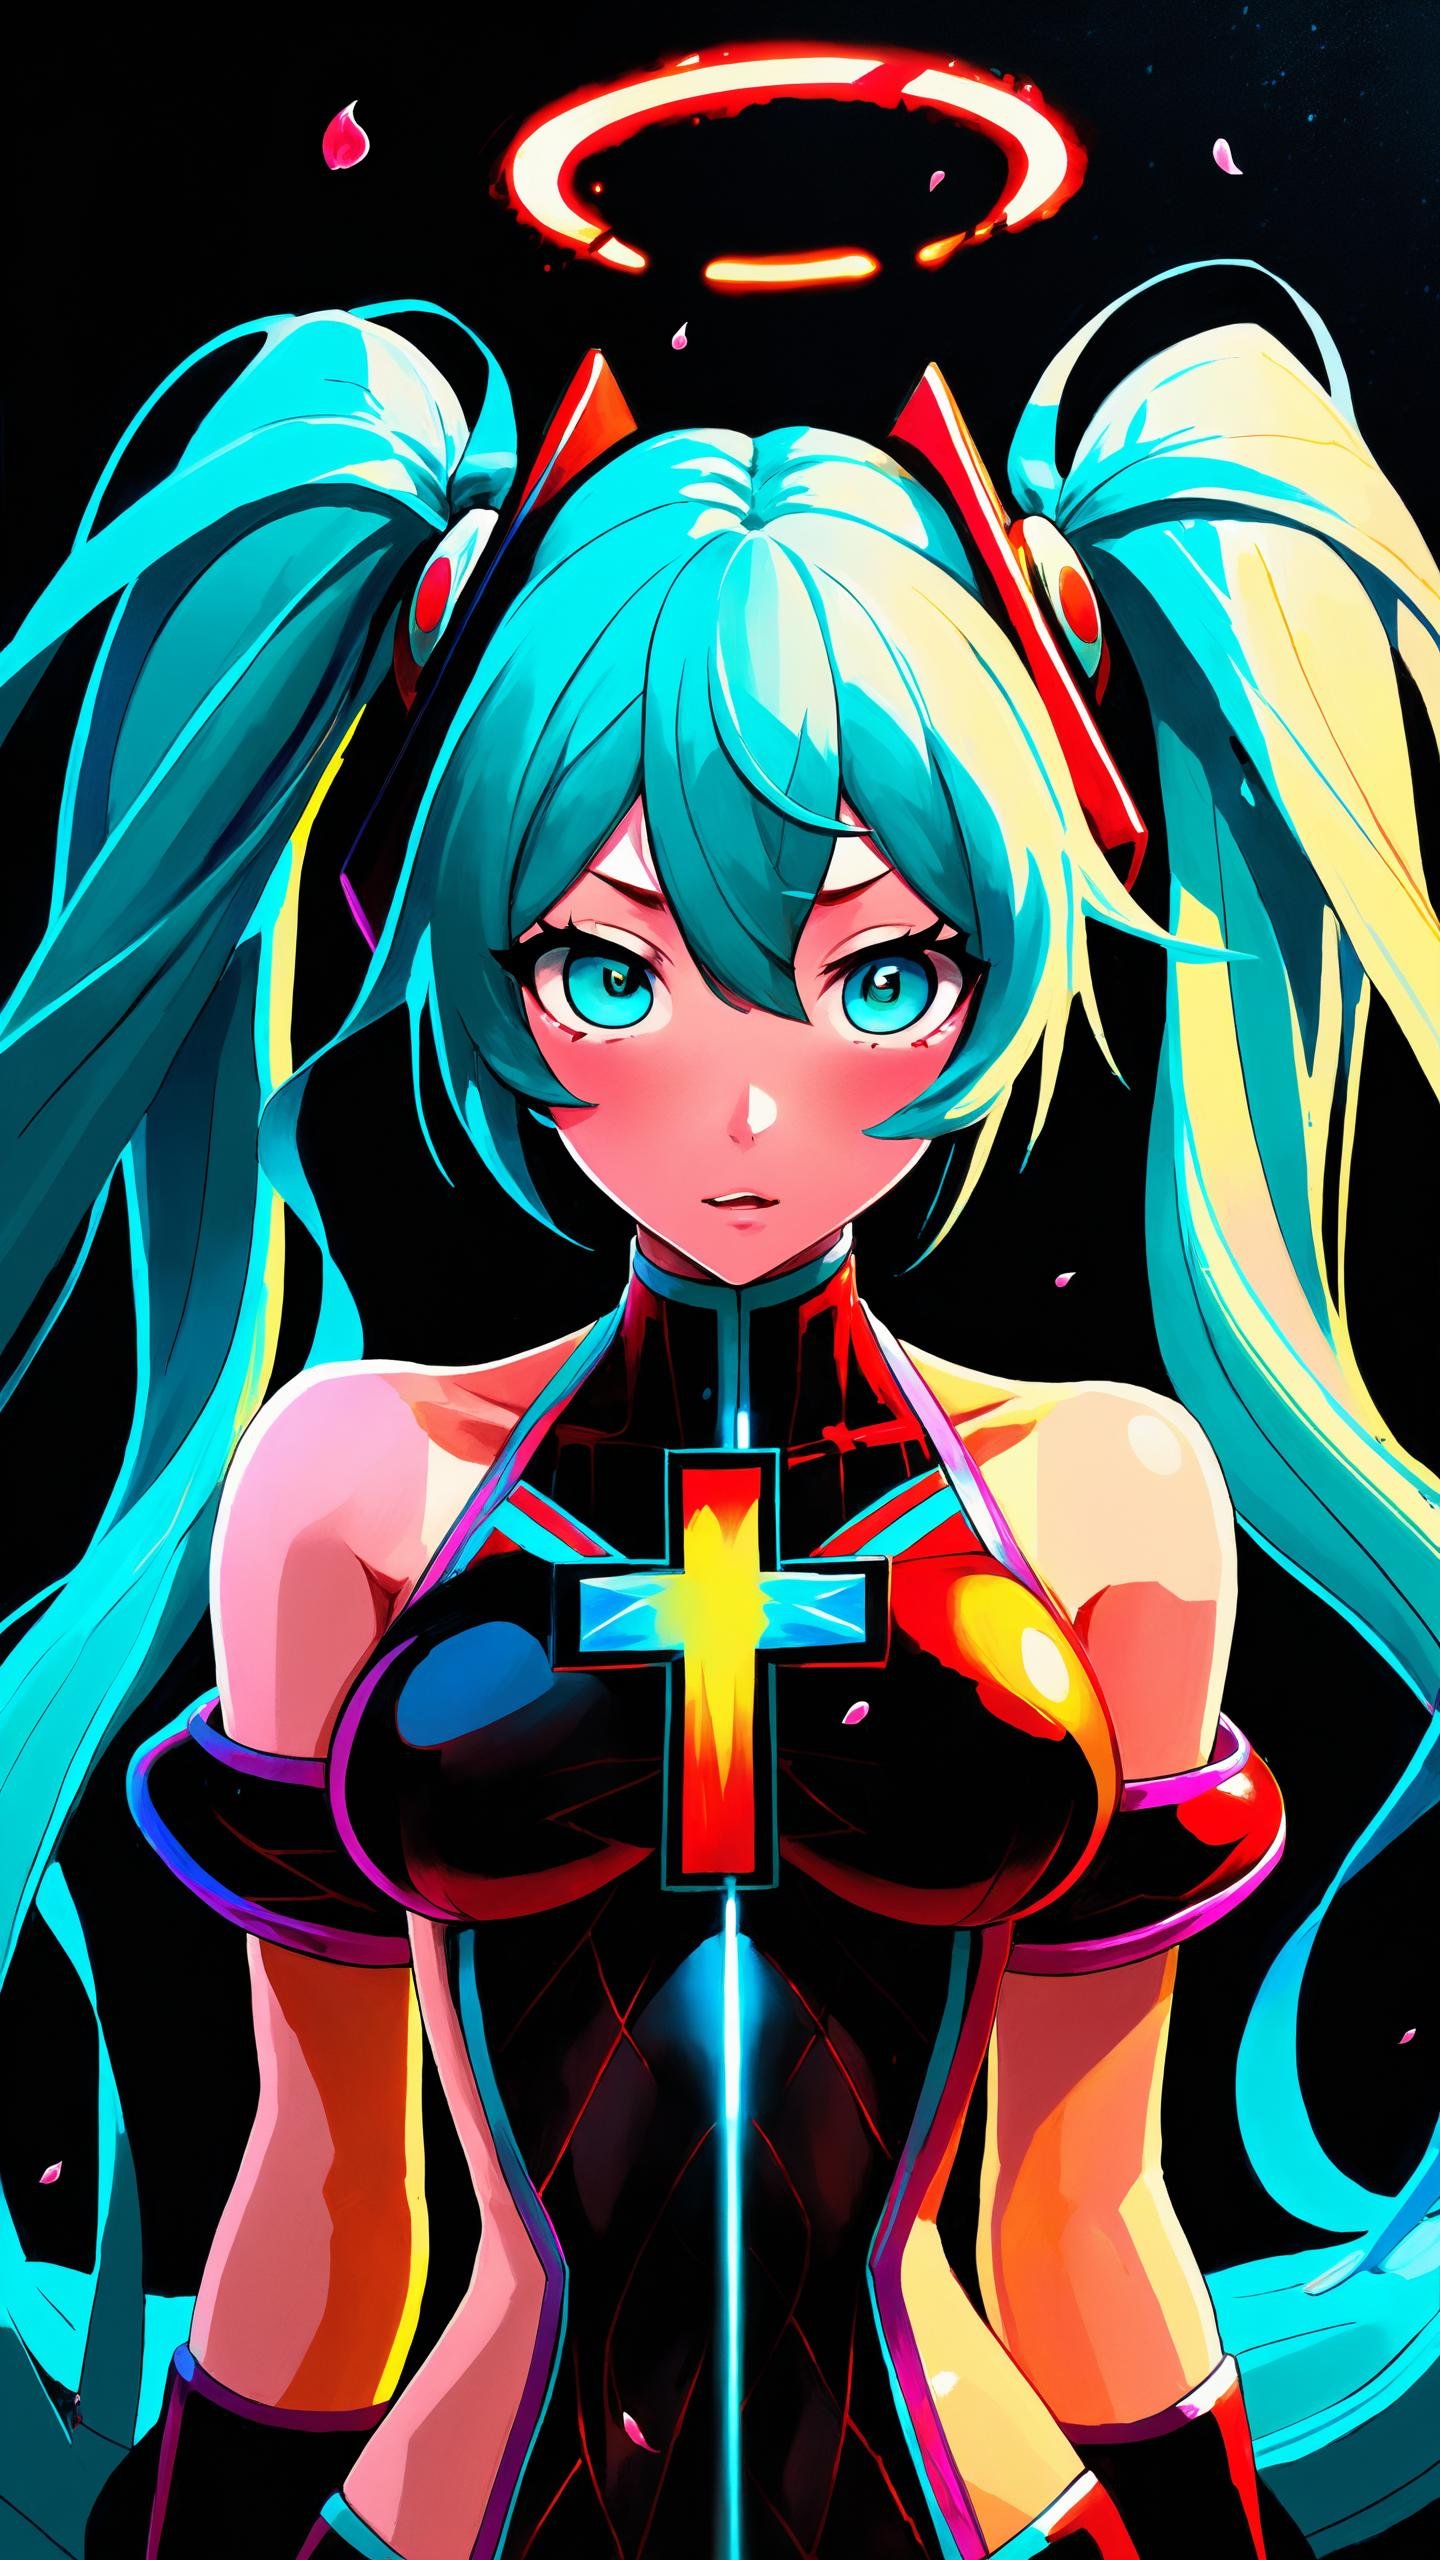 fighting game style masterpiece, best quality, ultra realistic,32k,RAW photo, detail skin, 8k uhd, dslr, high quality, film grain,\nShort and messy hair . dynamic, vibrant, action-packed, detailed character design, reminiscent of fighting video games, face focus, masterpiece, best quality, 1girl, hatsune miku, goth hatsune miku, latex clothing, suggestive face, hentai face, white roses, petals, night background, fireflies, light particle, solo, aqua hair with twin tails, aqua eyes, standing, pixiv, depth of field, cinematic composition, best lighting, looking up, black bloody veins growing and intertwining out of the darkness, oozing thick neon rainbow blood, veins growing and pumping blood, vascular networks growing, connecting, expanding, red veins everywhere, zdzislaw beksinski, (vibrant colors:1.1), (Repetition:1.1), (Cross-hatching:1.1), (Infrared:1.2), Rust, Hypercube, ultra detailed, intricate, oil on canvas, ((dry brush, ultra sharp)), (surrealism:1.1), (disturbing:1.1), beksinski style painting, sparks, lens flare, rim lighting, backlighting, RTX, Post Processing, satanic cross, man body, muscular, venom costume